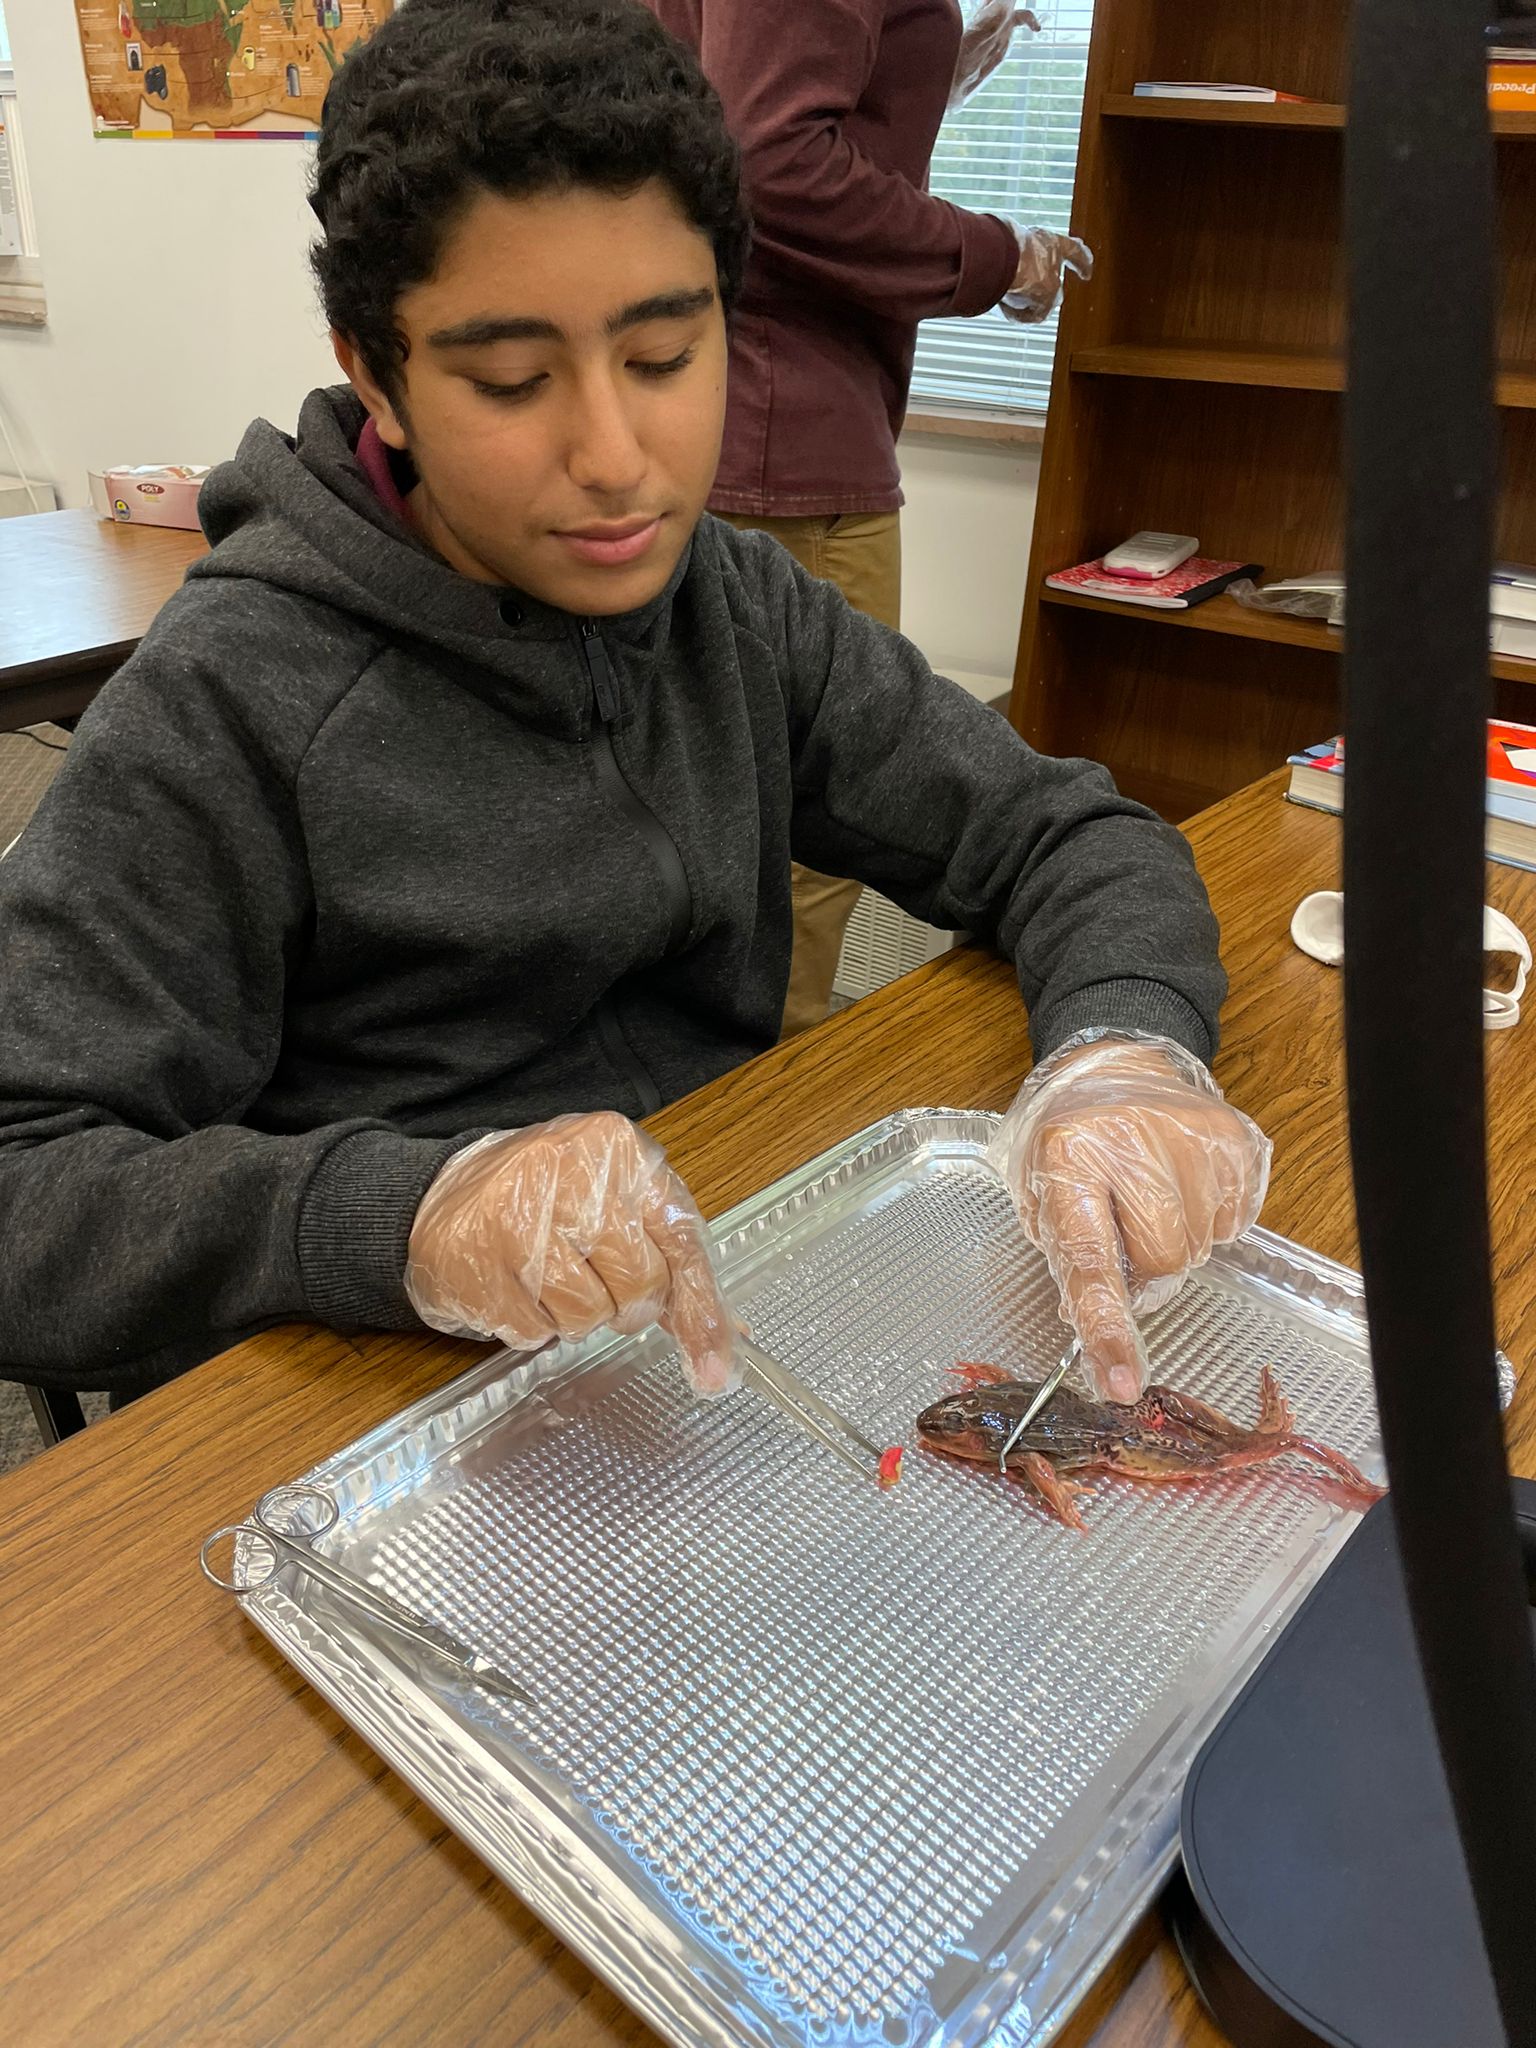 Frog Dissection Lab